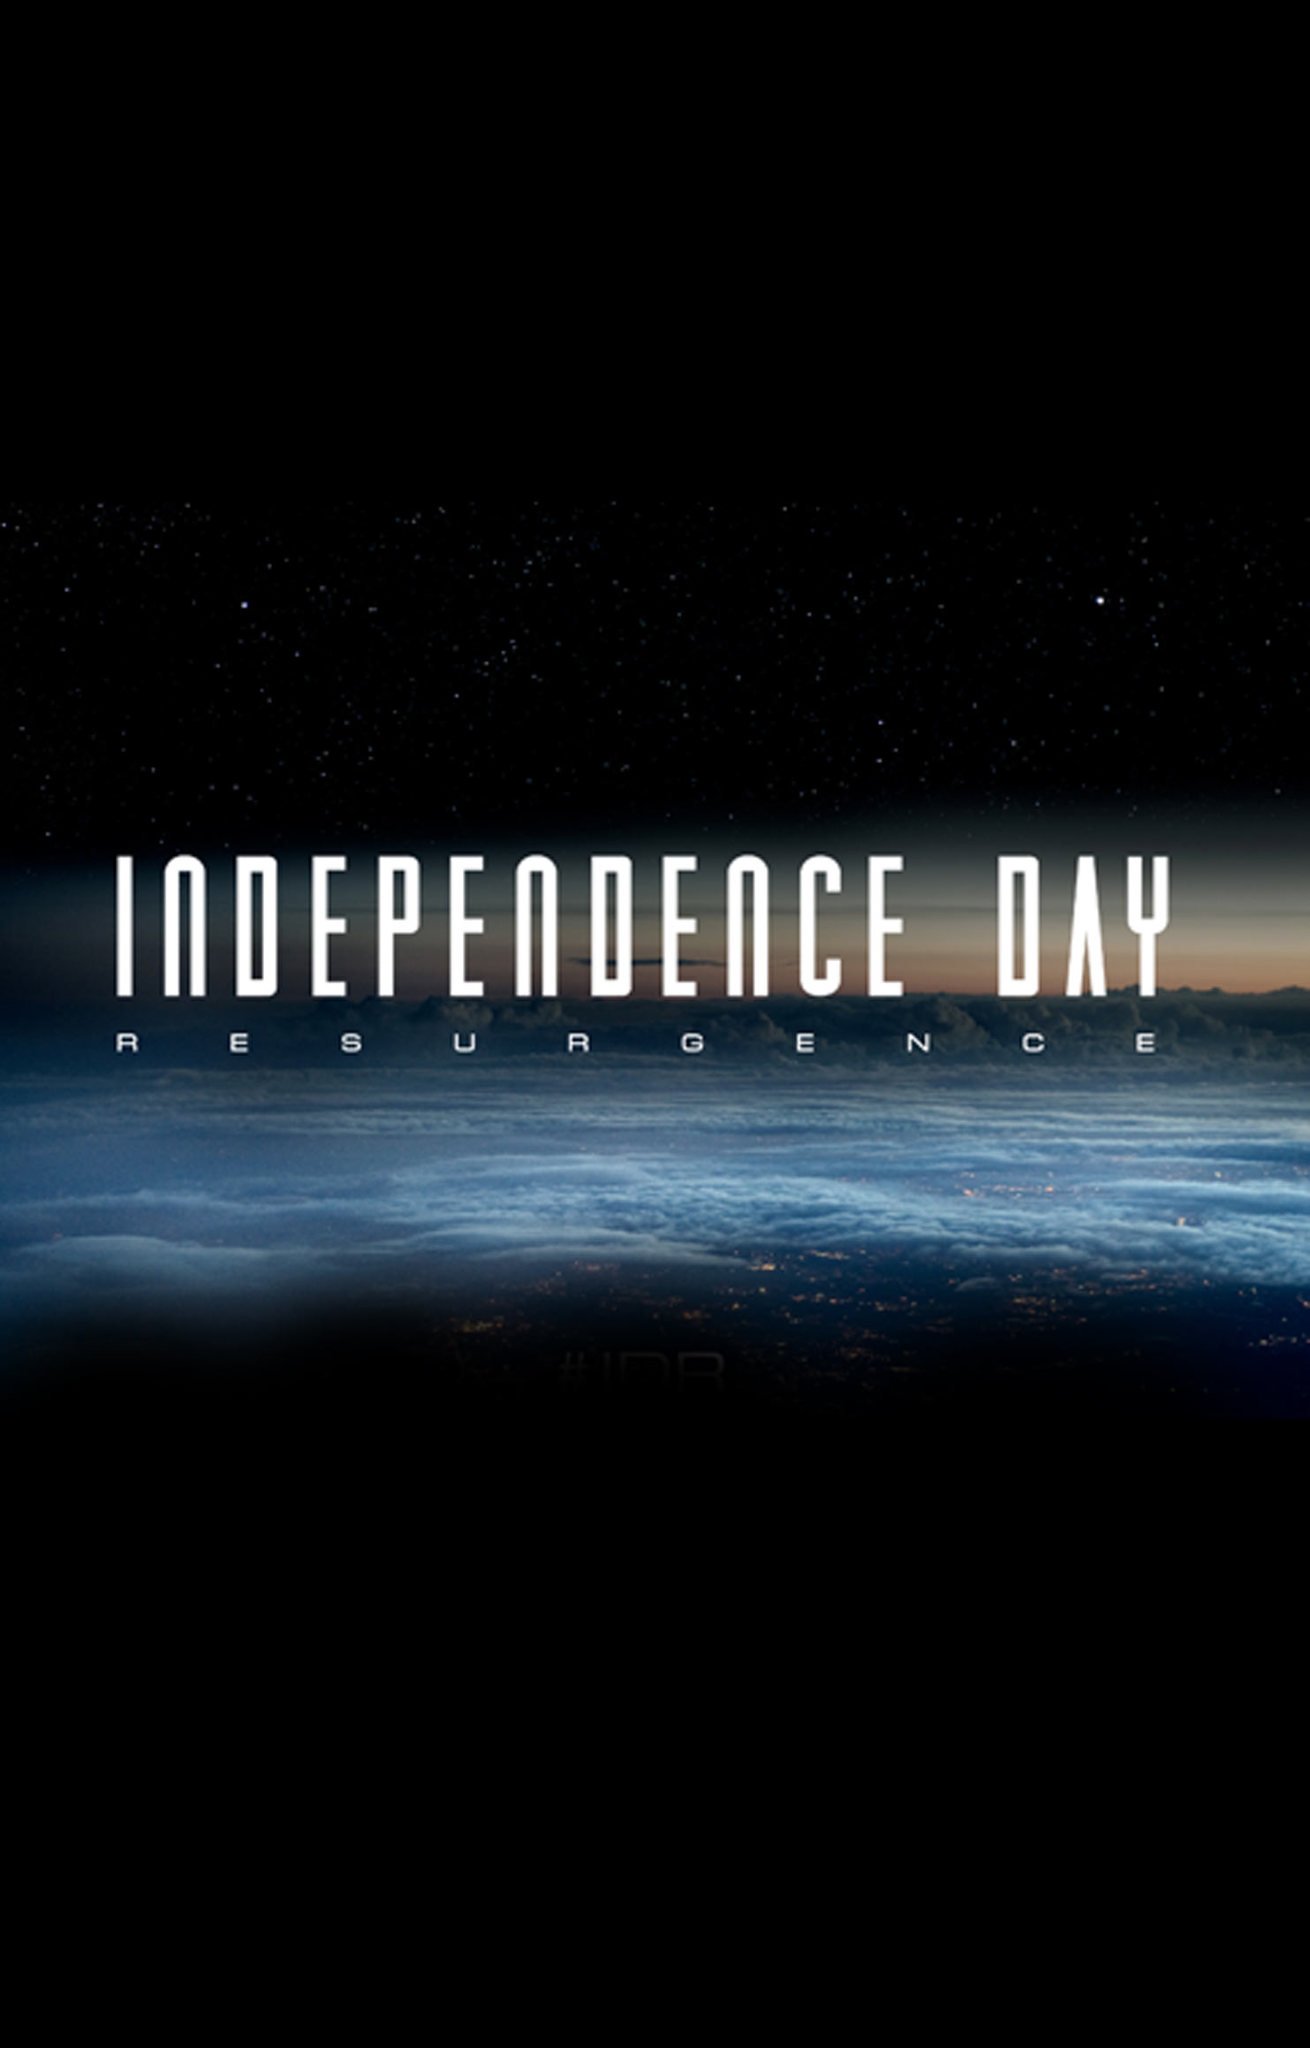 watch independence day movie